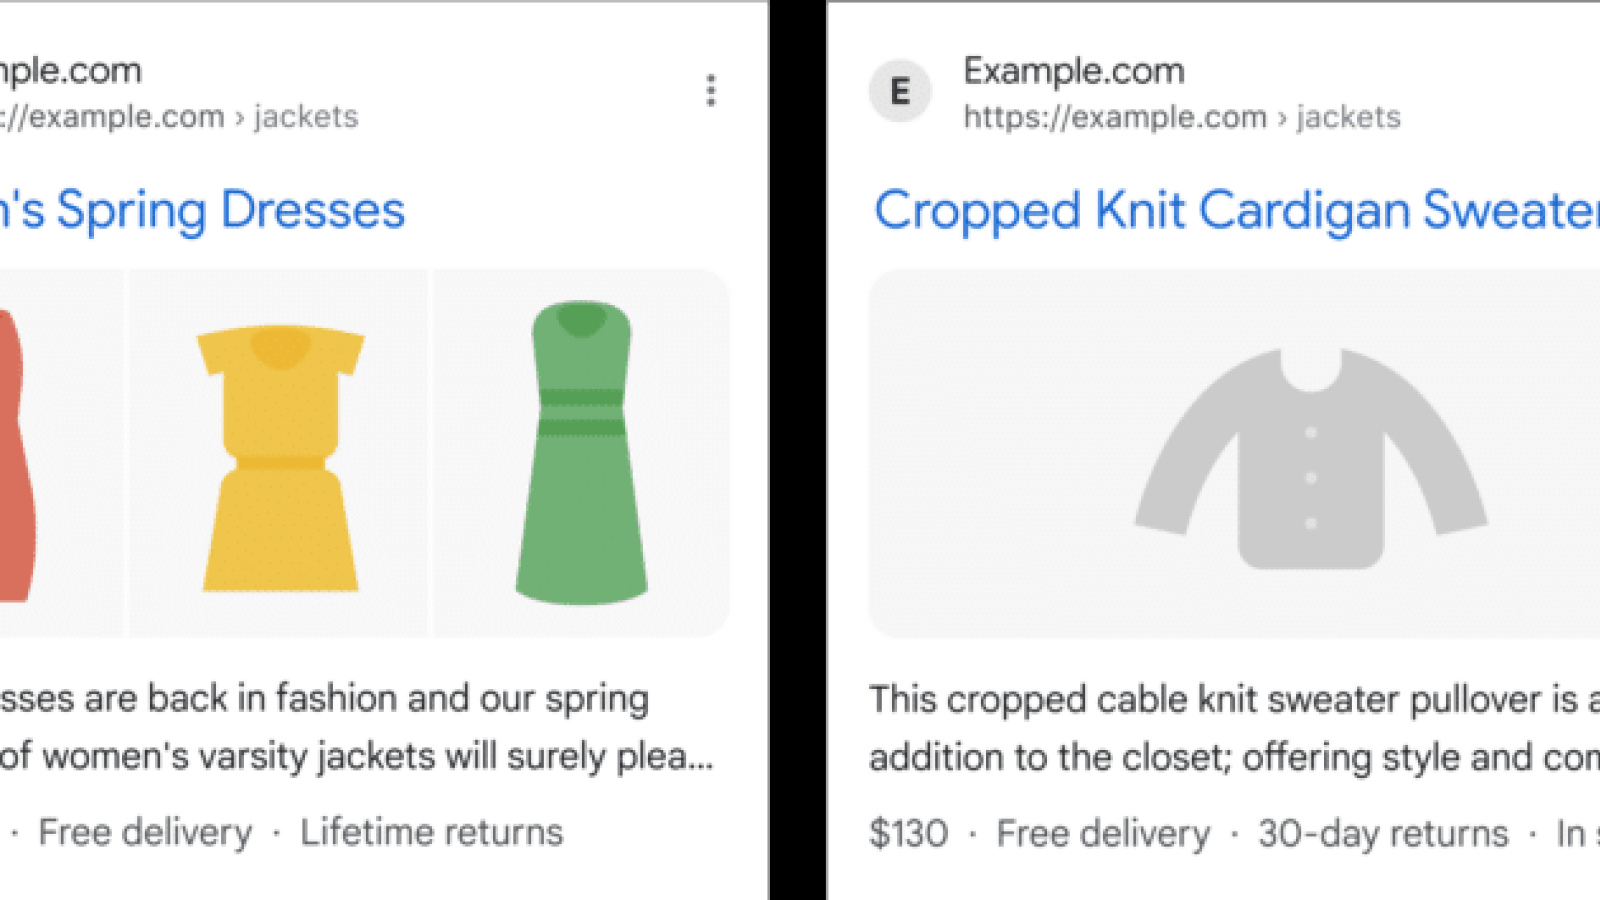 Google shows shipping and return information in the search results